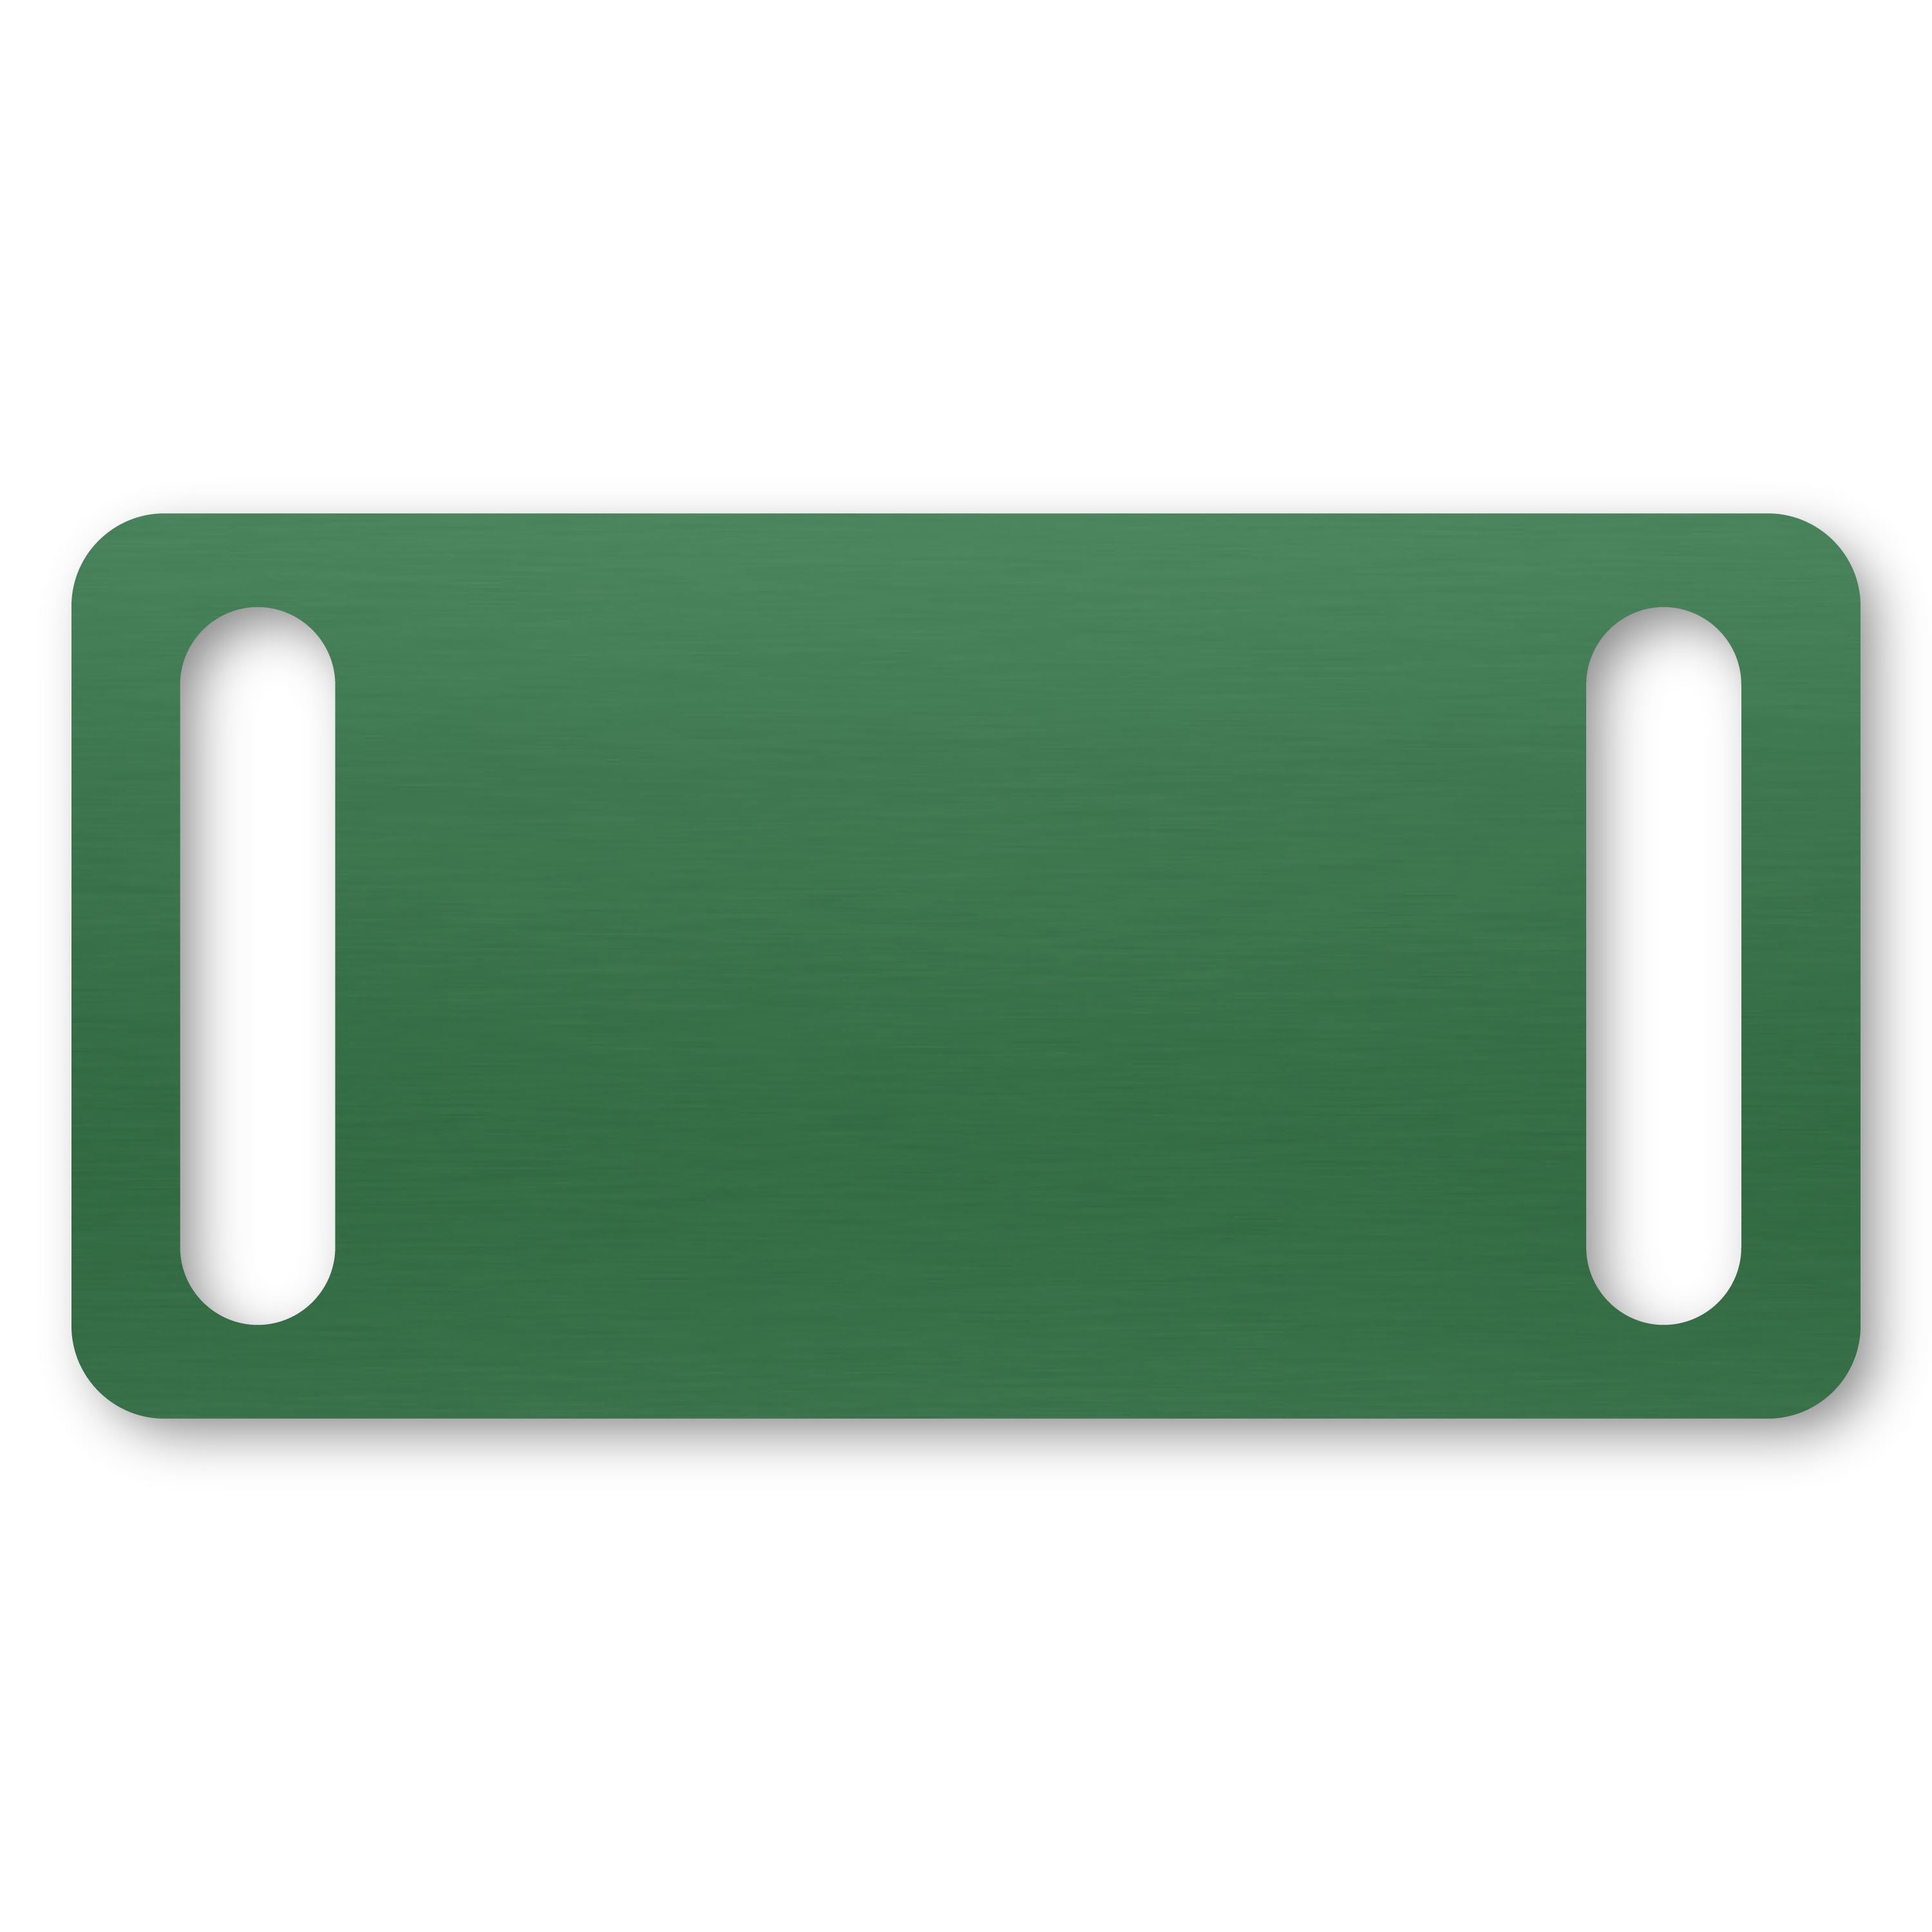 Anodized Aluminum Rectangle Slide-On Tags, 1-3/16" x 2" with 1/4" x 1" Slot, Laser Engraved Metal Tags Craftworks NW Green 